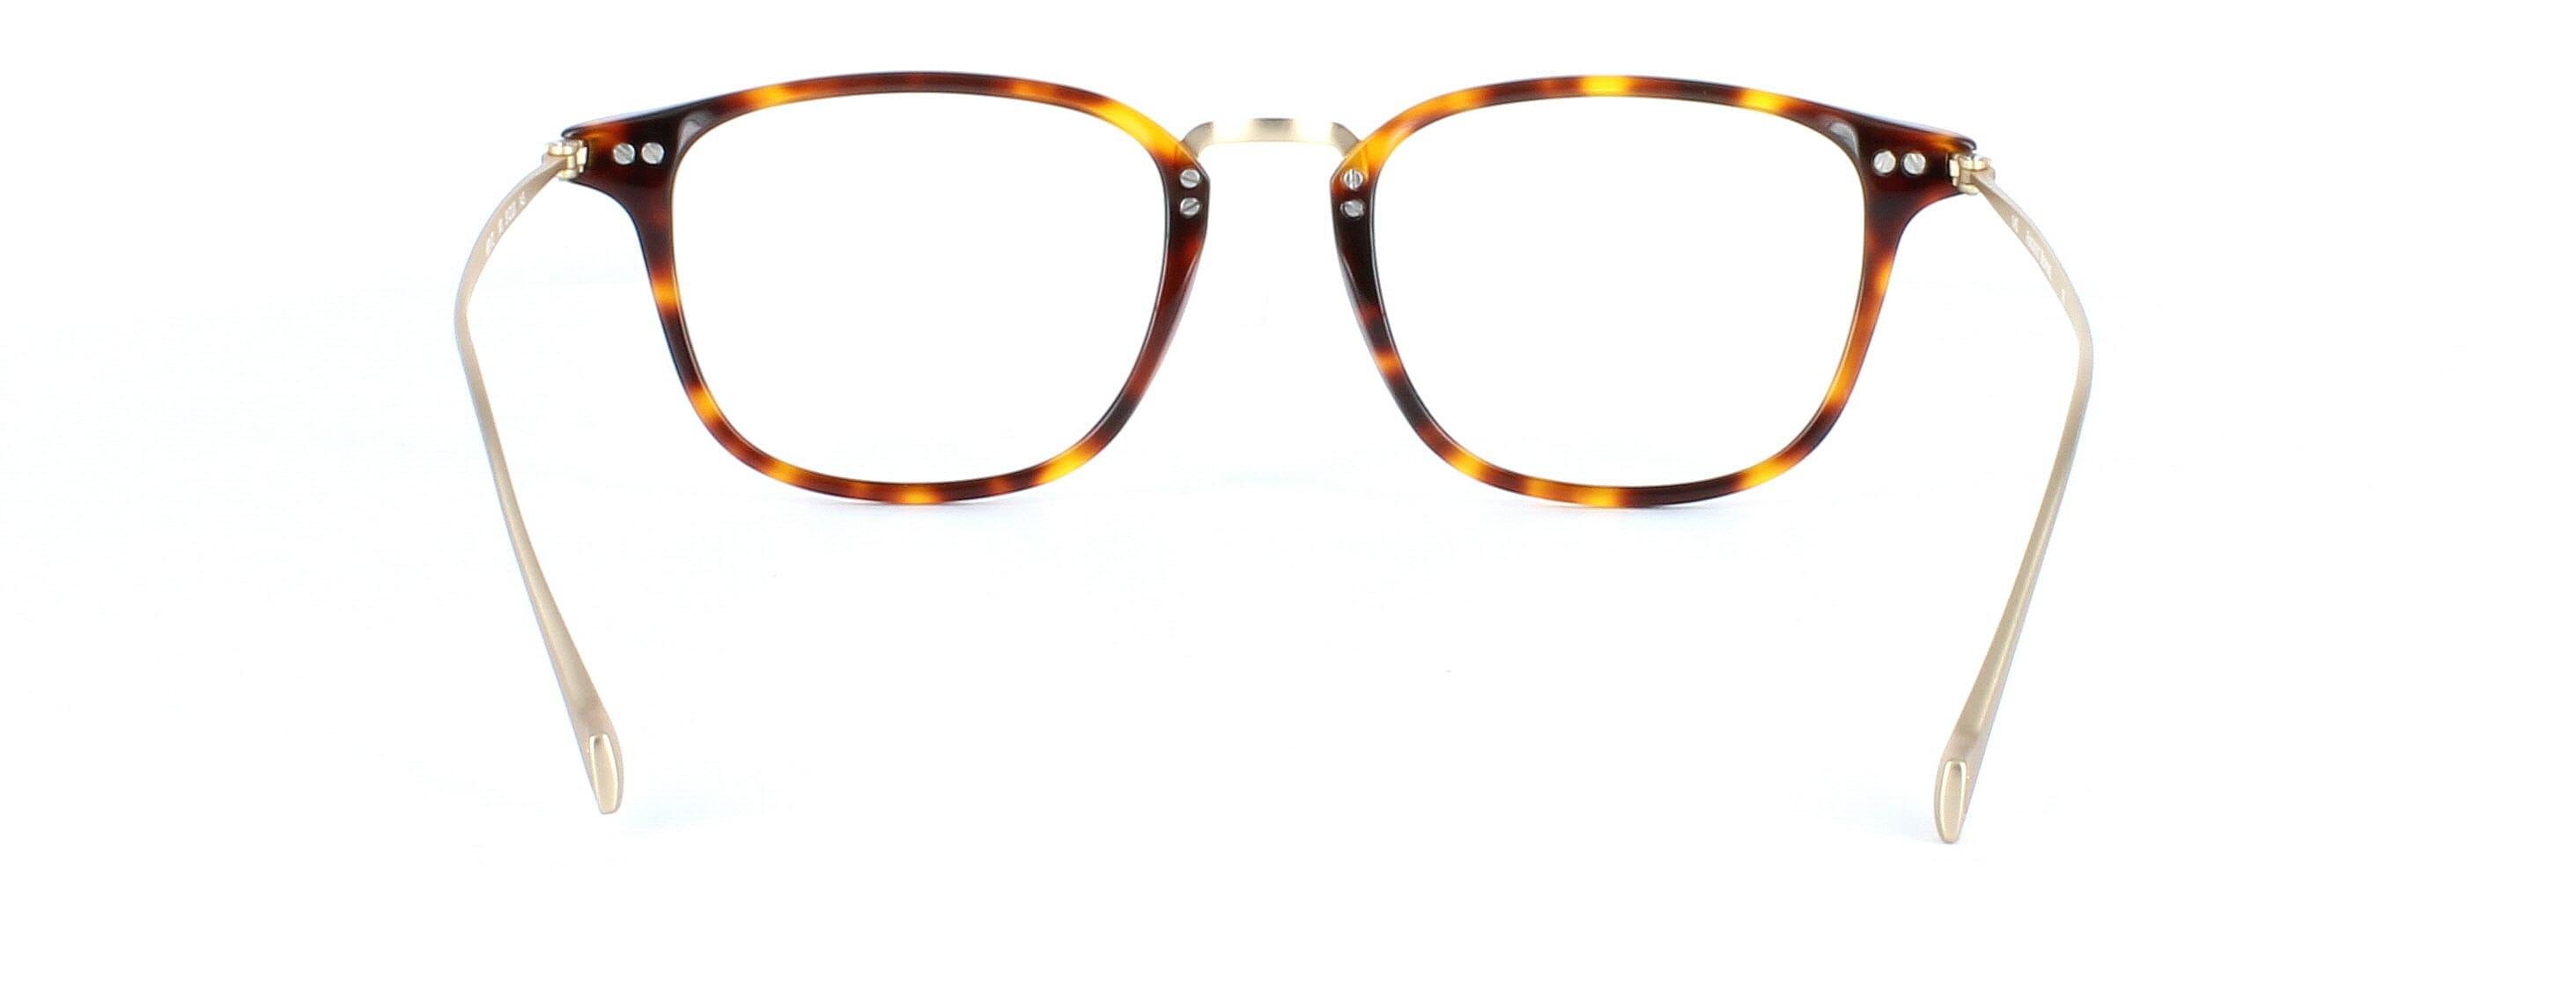 Hackett 172 - Unisex acetate and metal glasses frame in tortoise and gold - image 3